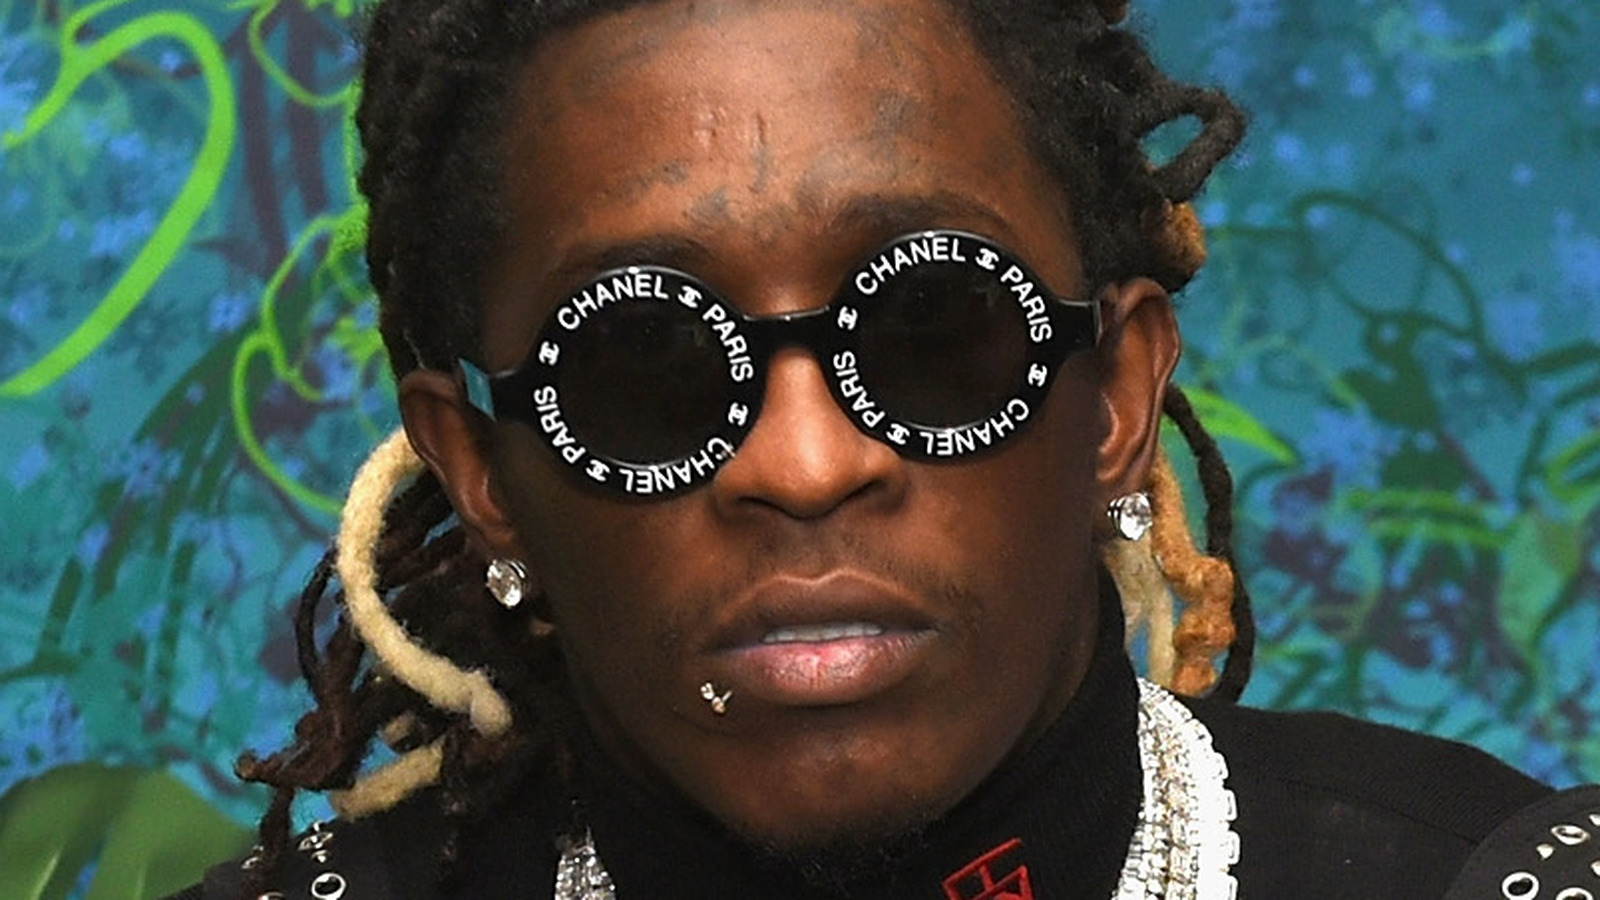 Real Meaning Behind 'Paid The Fine' By Young Thug & Gunna Featuring Baby & YTB Trench